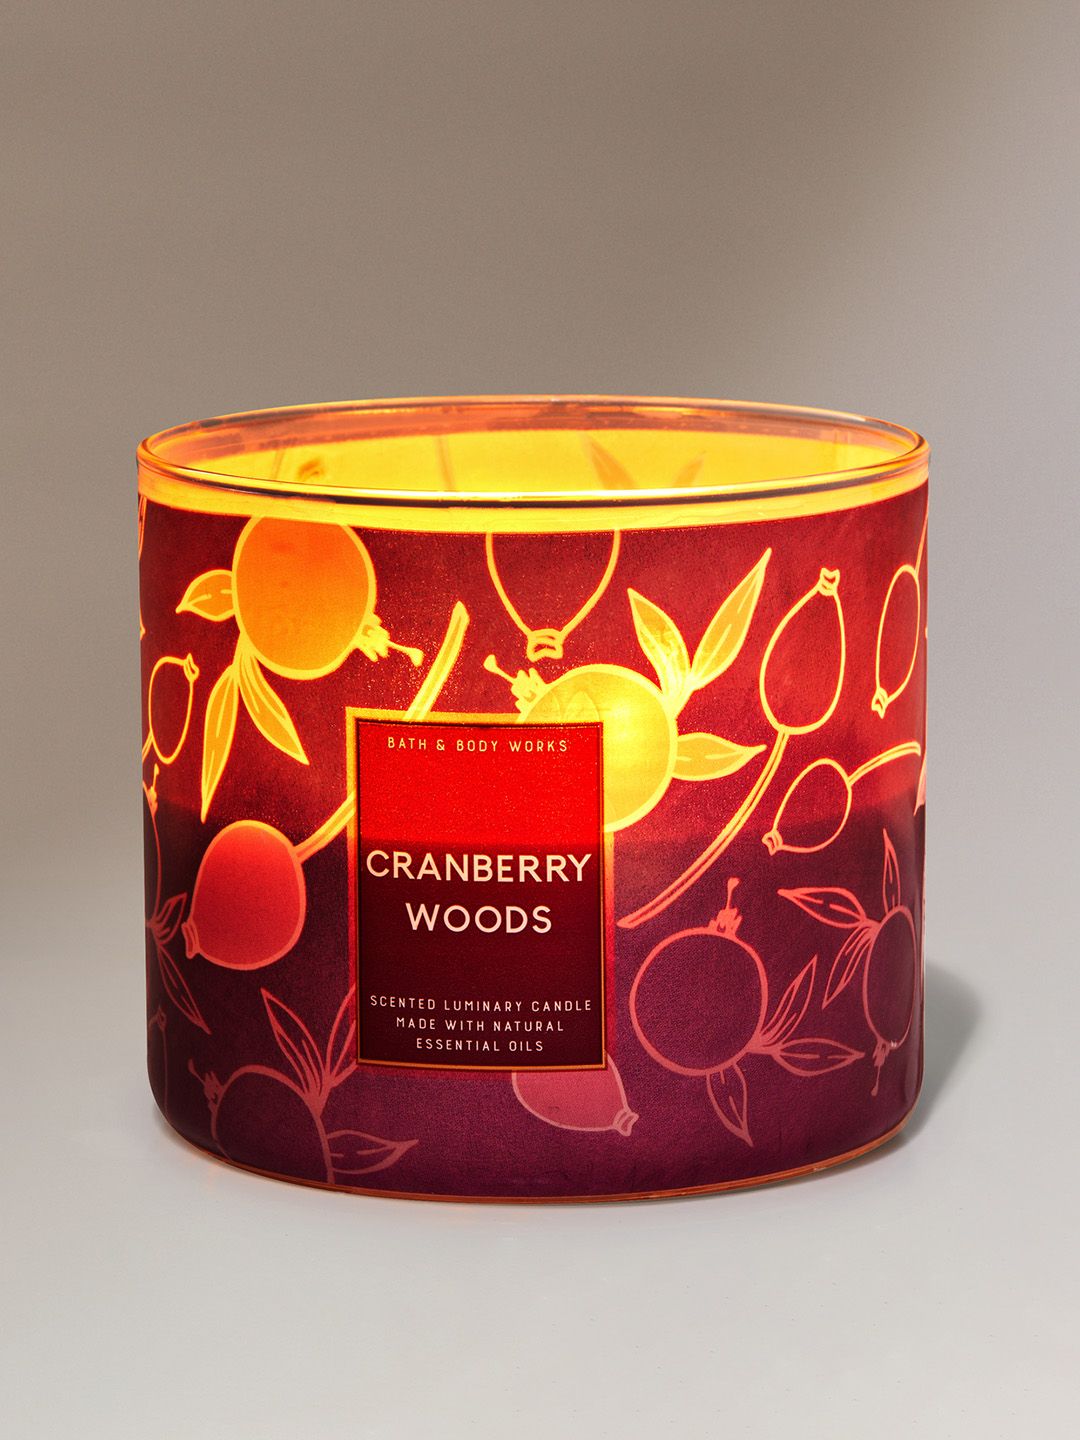 Bath & Body Works Cranberry Woods 3-Wick Scented Candle with Natural Essential Oils - 411g Price in India